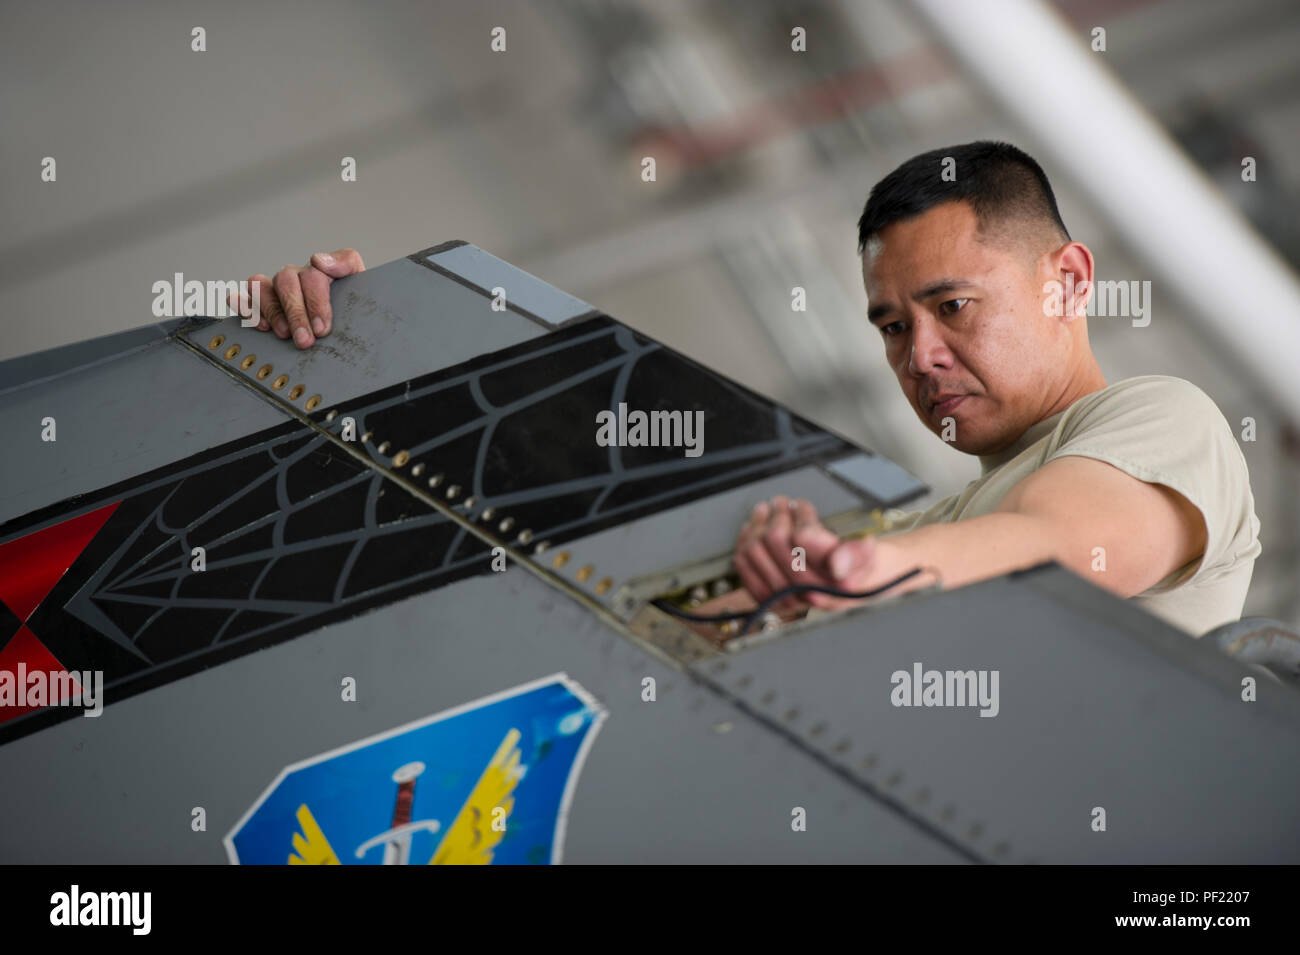 Tech. Sgt. Ritchie Videna, 455th Expeditionary Aircraft Maintenance Squadron avionics specialist, replaces a recently repaired Very High Frequency AM antenna on an F-16 Fighting Falcon assigned to the 421st Expeditionary Fighter Squadron at Bagram Air Field, Afghanistan, Feb. 24, 2016. The 455th EAMXS ensures aircraft are prepared for flight and return them to a mission-ready state once they land. (U.S. Air Force photo/Tech. Sgt. Robert Cloys) Stock Photo